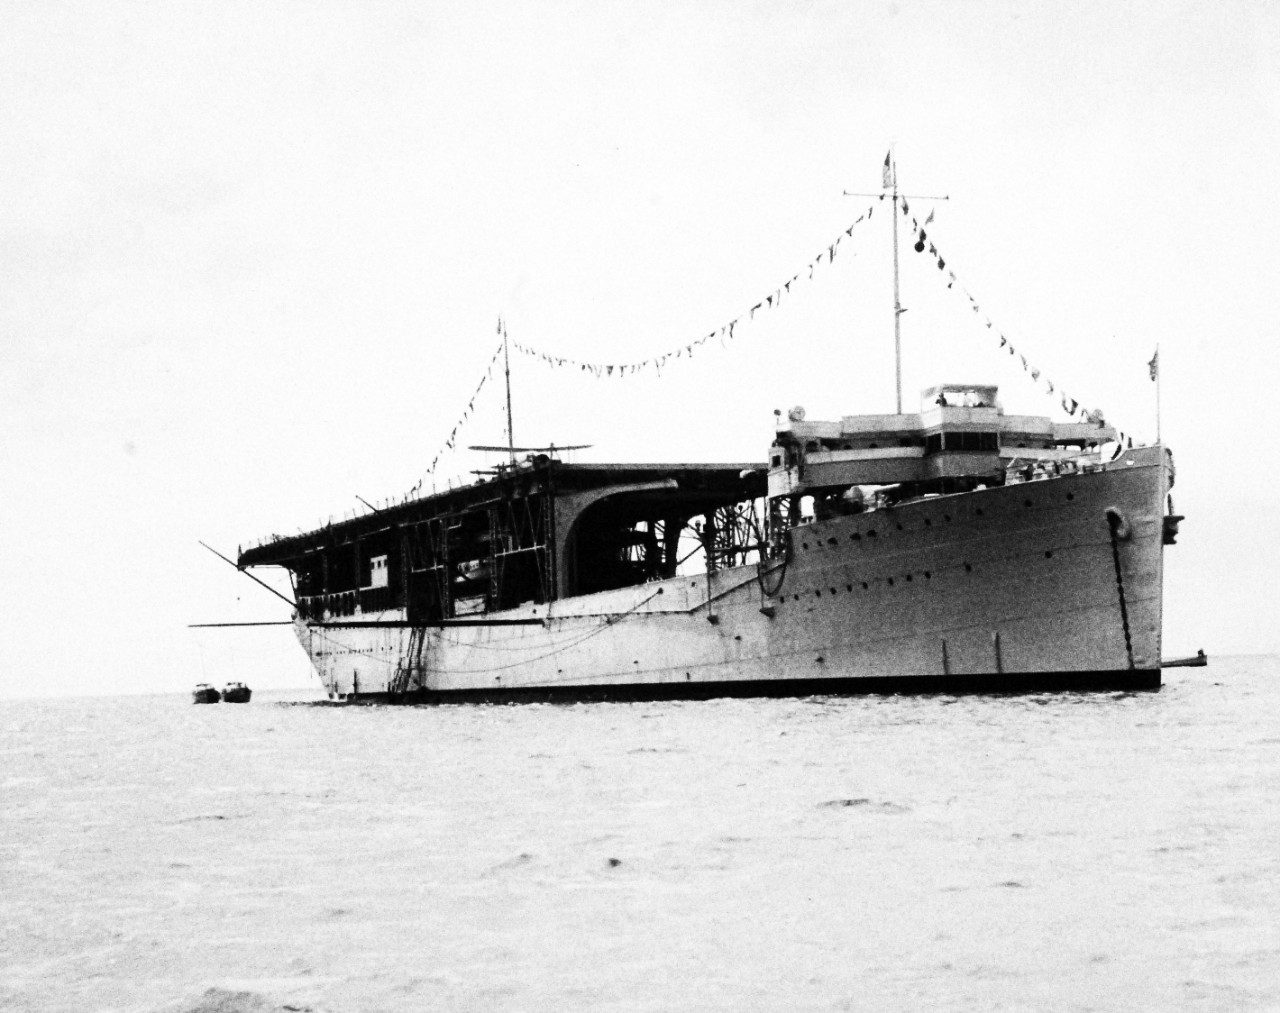 80-G-185870:   USS Langley (AV-3),  1937.   Starboard bow, at French Frigate Shoals, October 27, 1937.  Official U.S. Navy photograph, now in the collections of the National Archives.  (2015/12/22). 